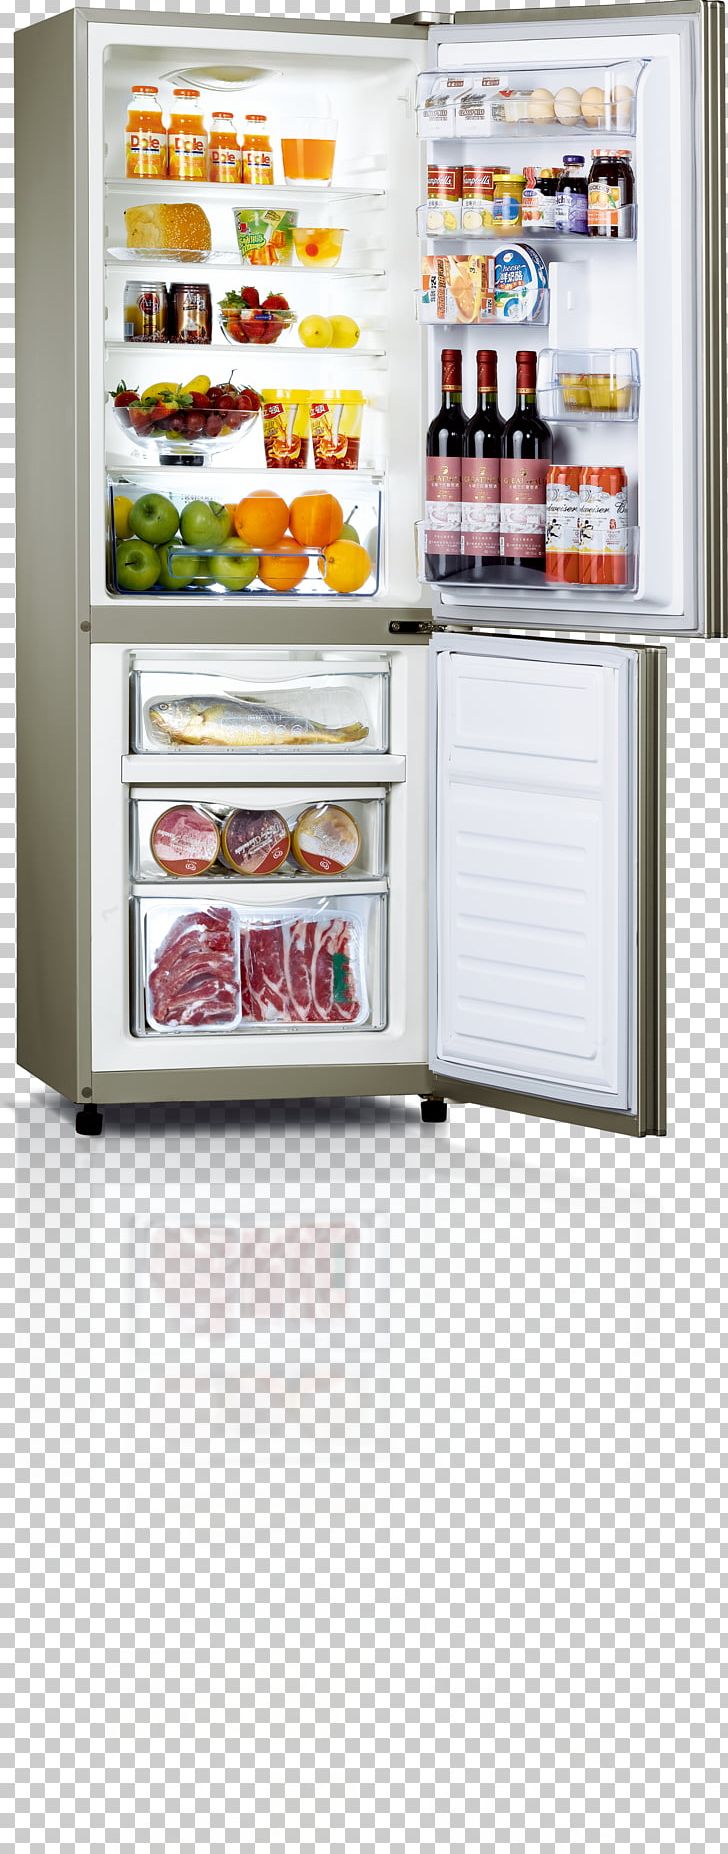 Refrigerator Air Freshener Solar Air Conditioning Air Purifier Tmall PNG, Clipart, Air, Electronic Product, Frozen Food, Furniture, Home Appliance Free PNG Download